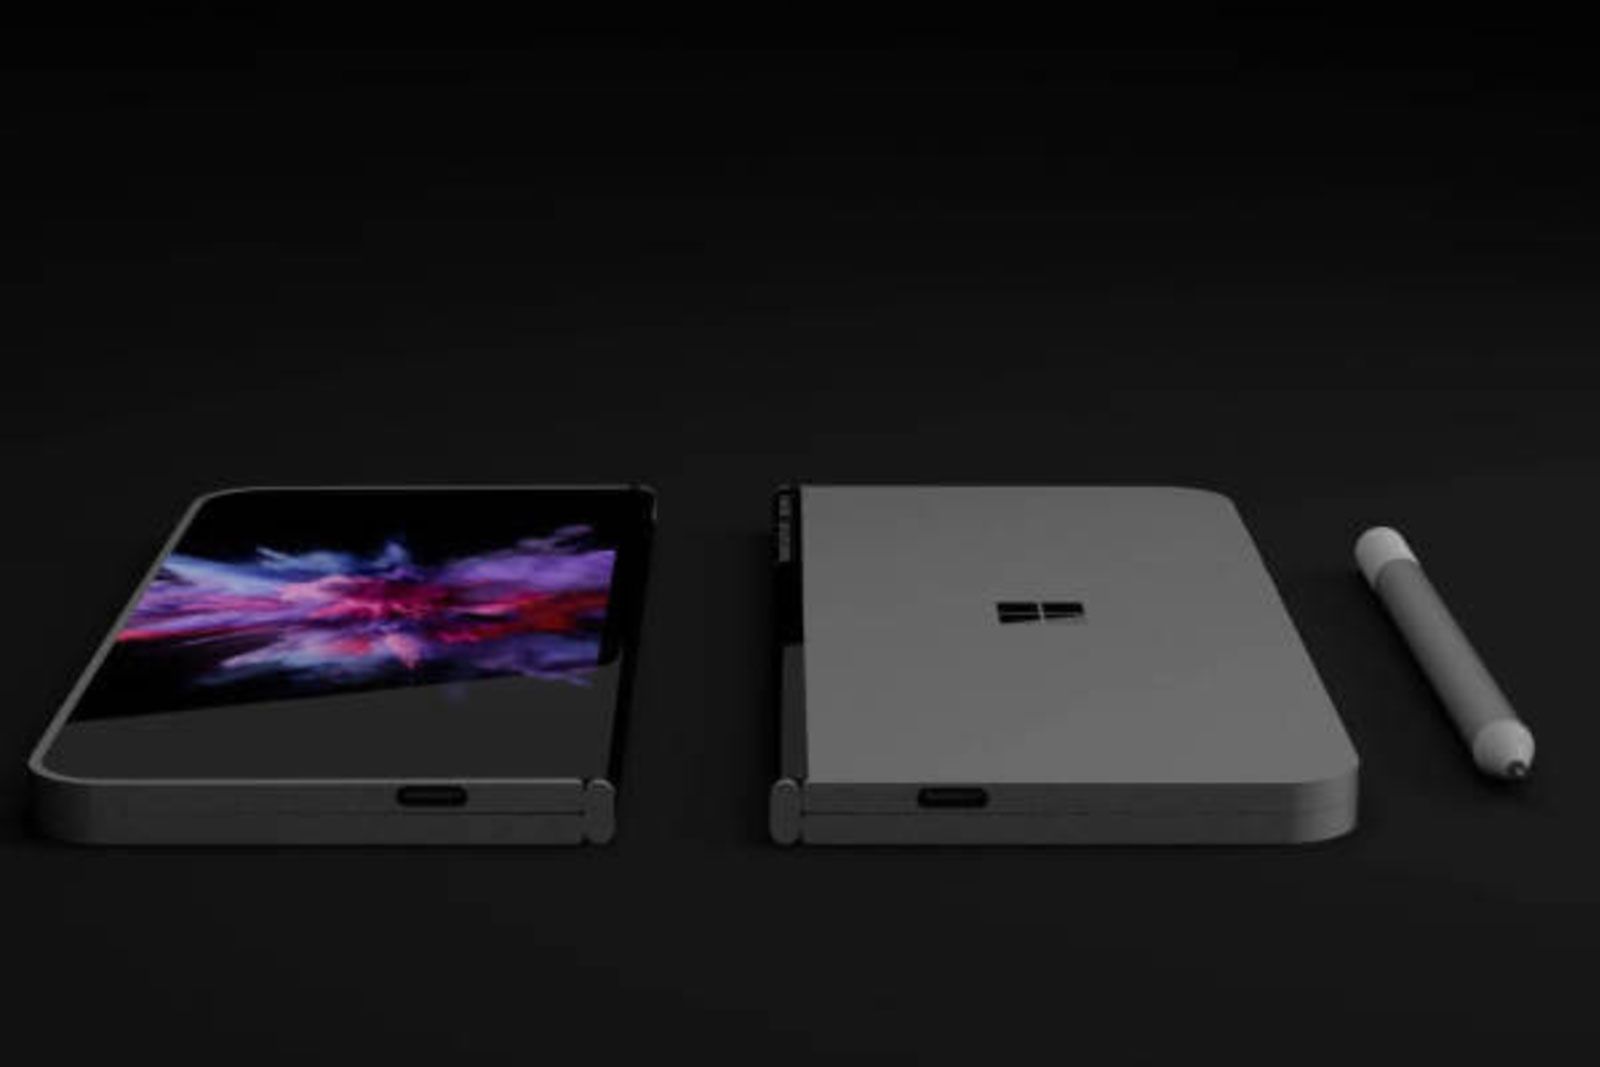 Microsoft Surface Phone back on the cards Windows 10 on ARM Snapdragon 850 SoC image 1